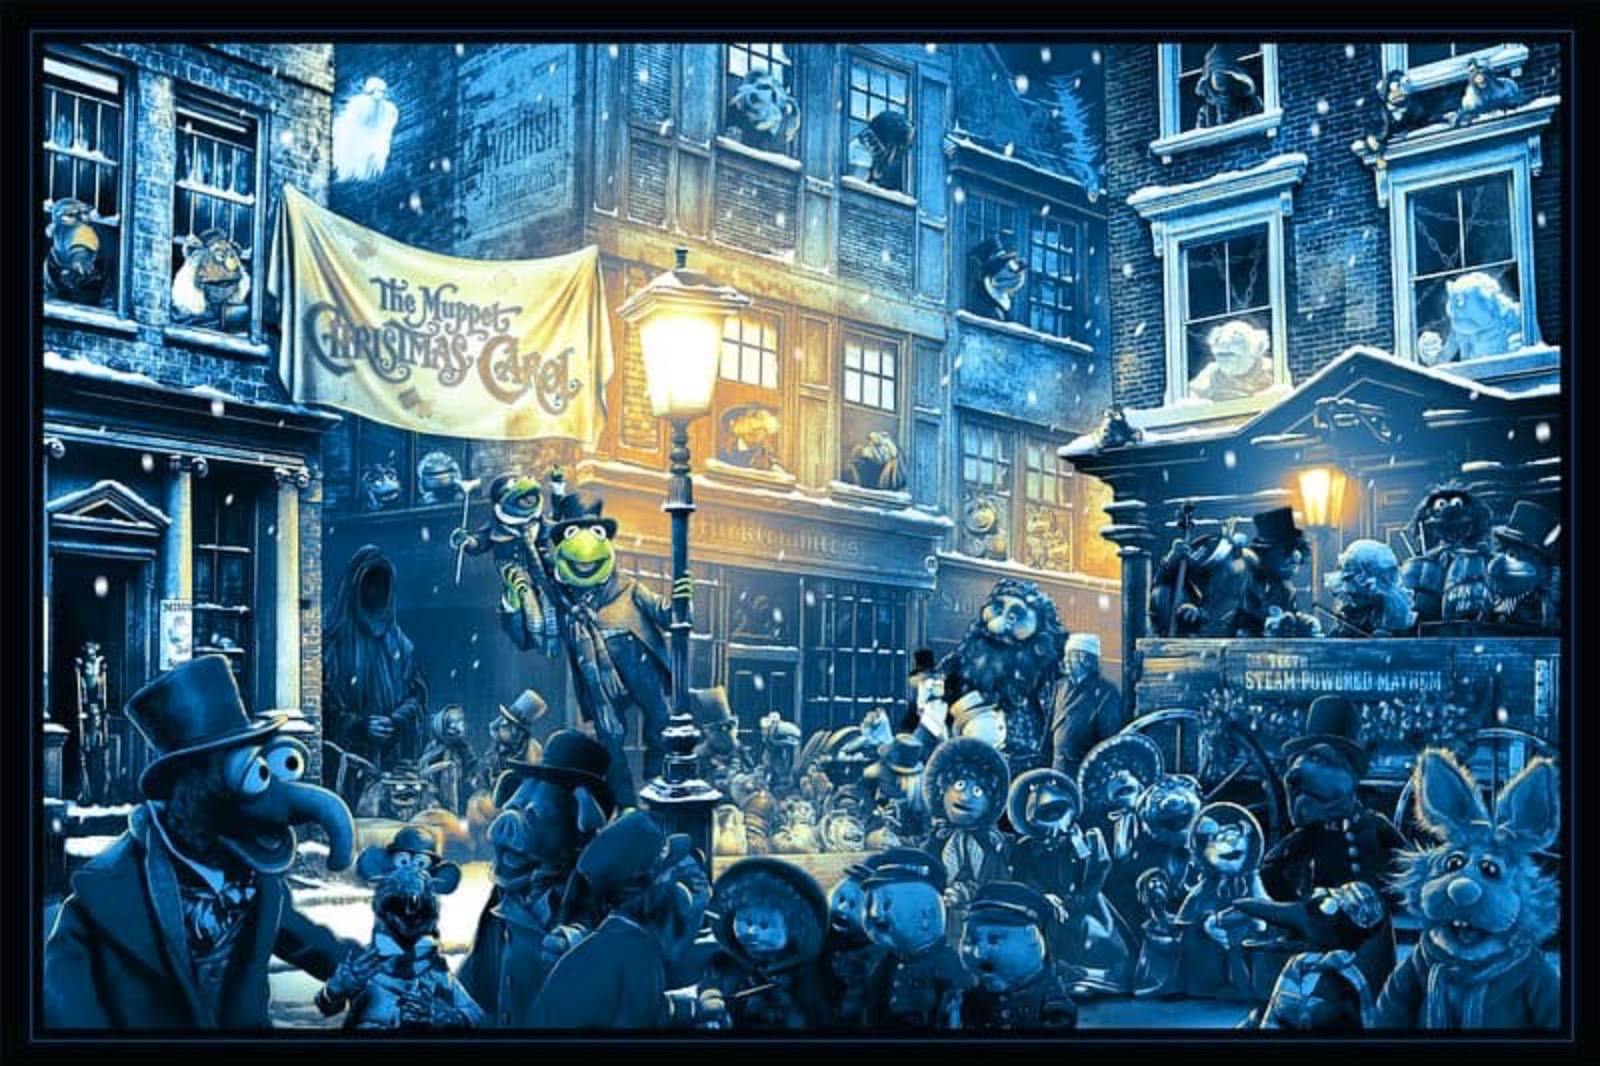 An excellent Muppet Christmas Carol poster by artist Kevin Wilson. (Image: Hero Complex Gallery)